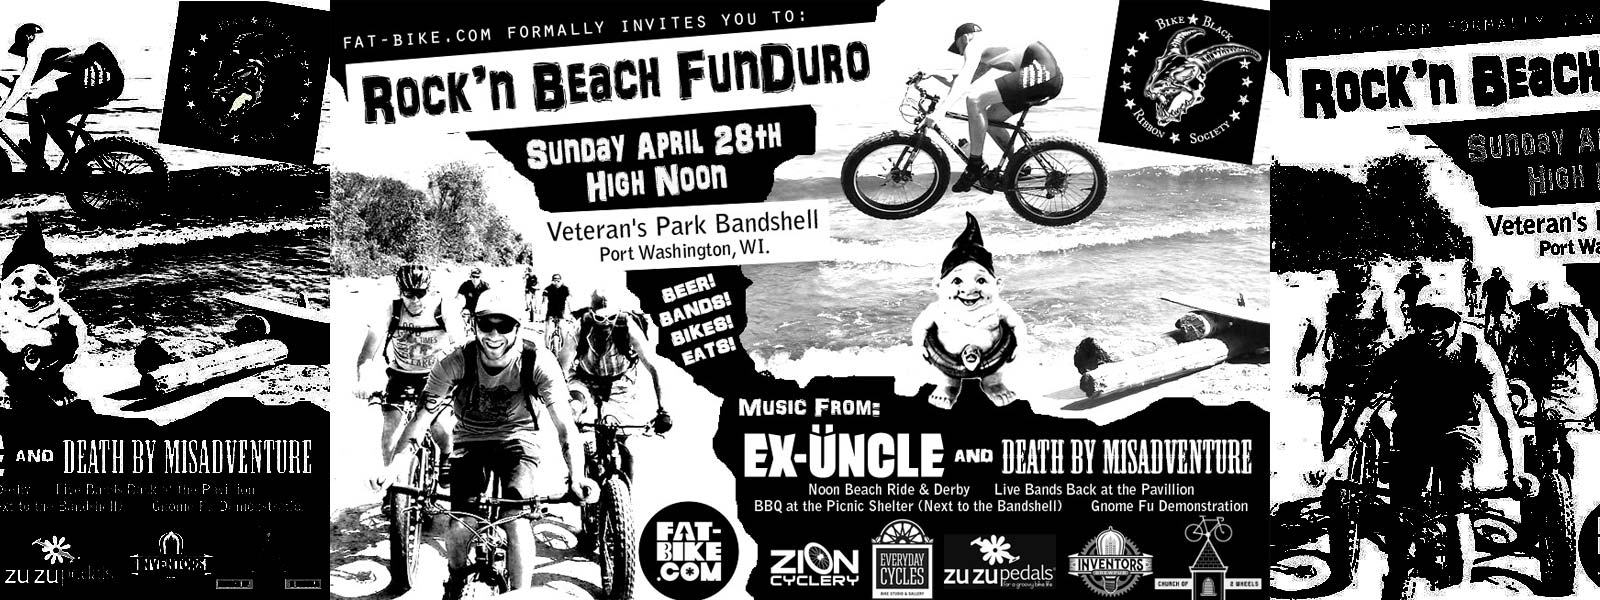 Join the Everyday Cycles Crew at The Rock’n Beach FunDuro in Port Washington